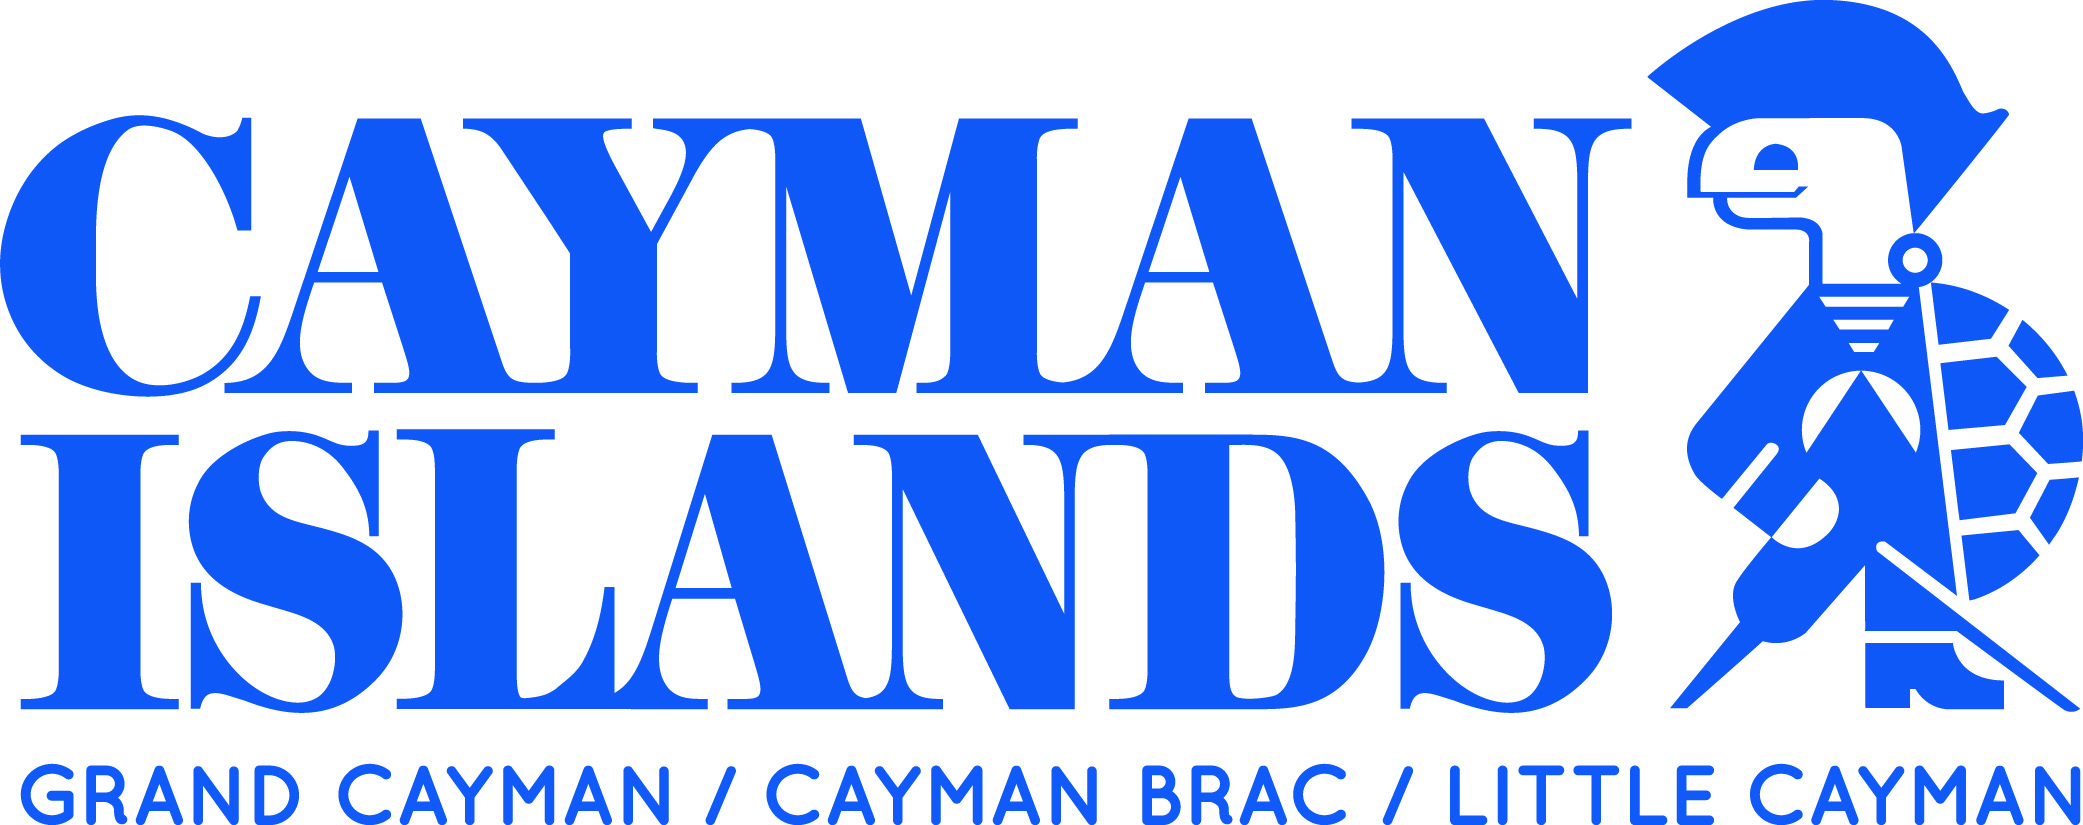 ministry of tourism cayman islands